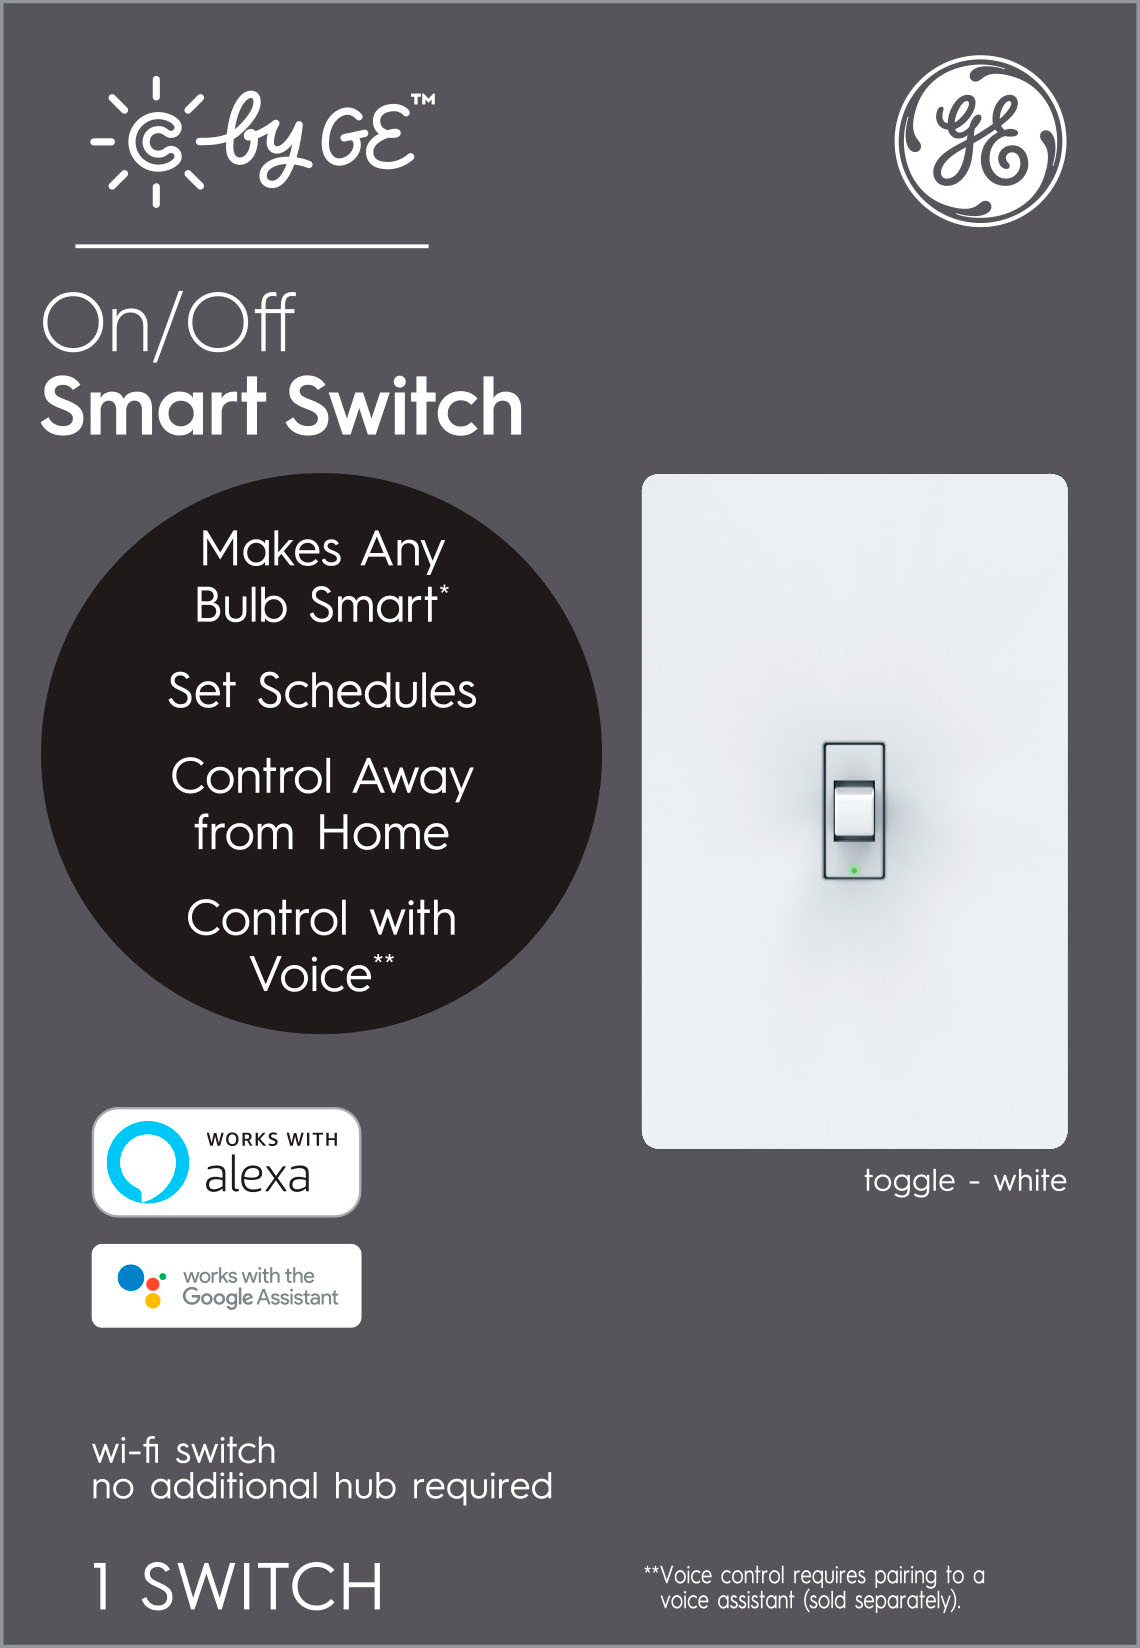 GE CYNC Smart Switch, No Neutral Wire Required, On-Off Button Style with  Bluetooth and 2.4 GHz Wifi (Packaging May Vary) White 93120080 - Best Buy